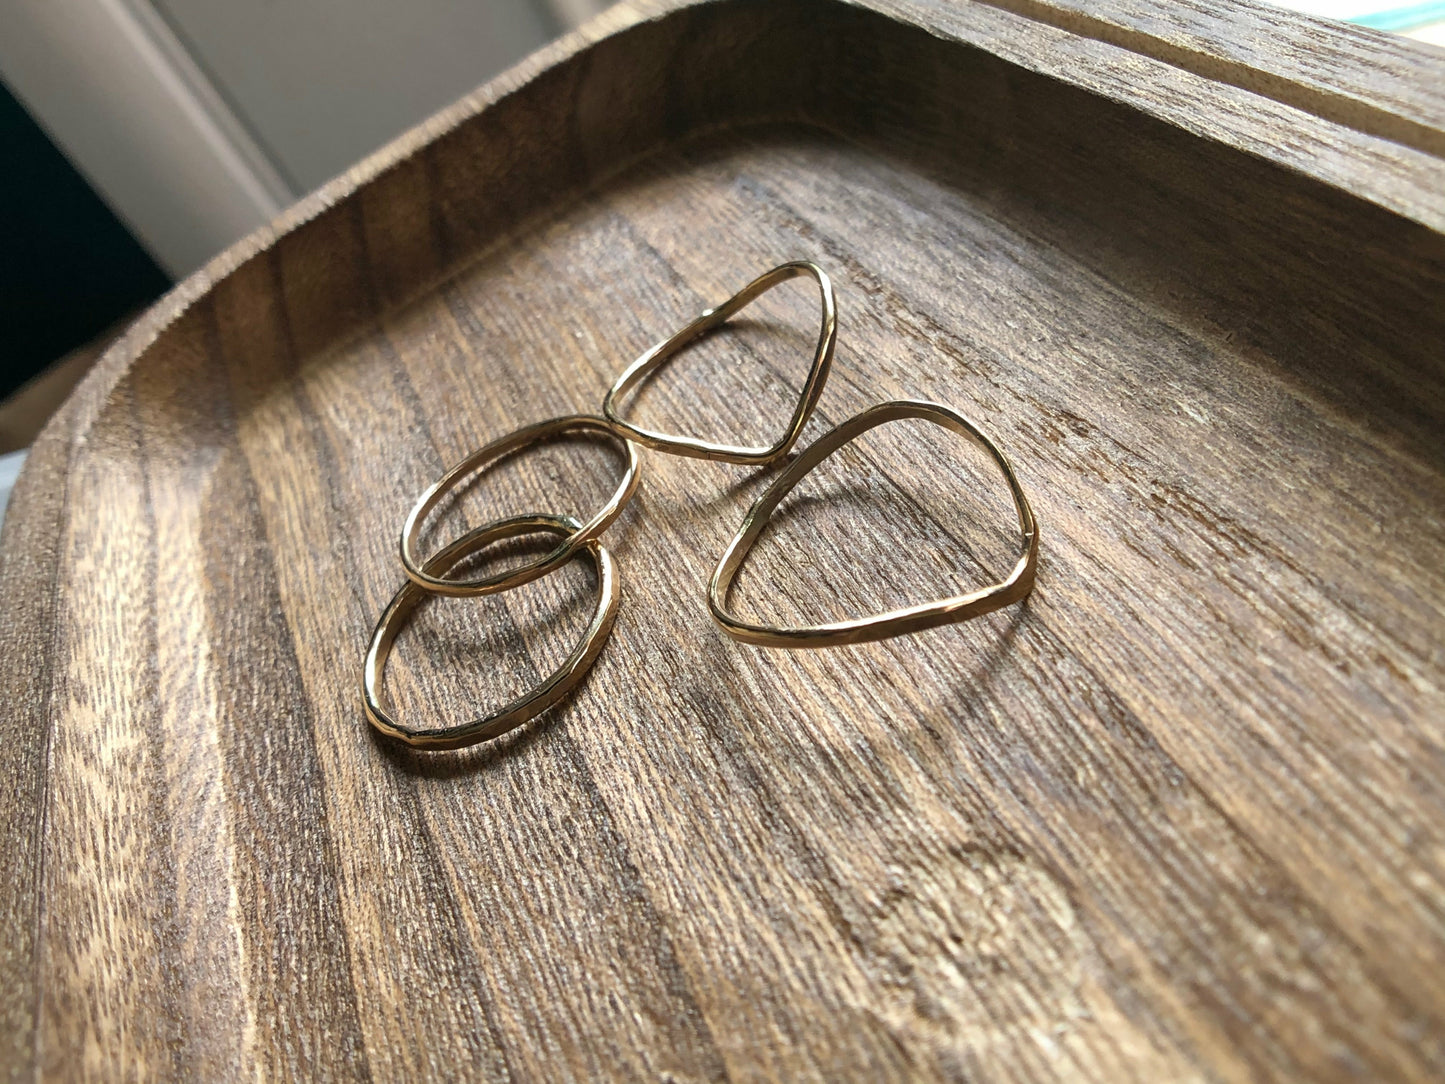 small gold filled rings with one ring a chevron